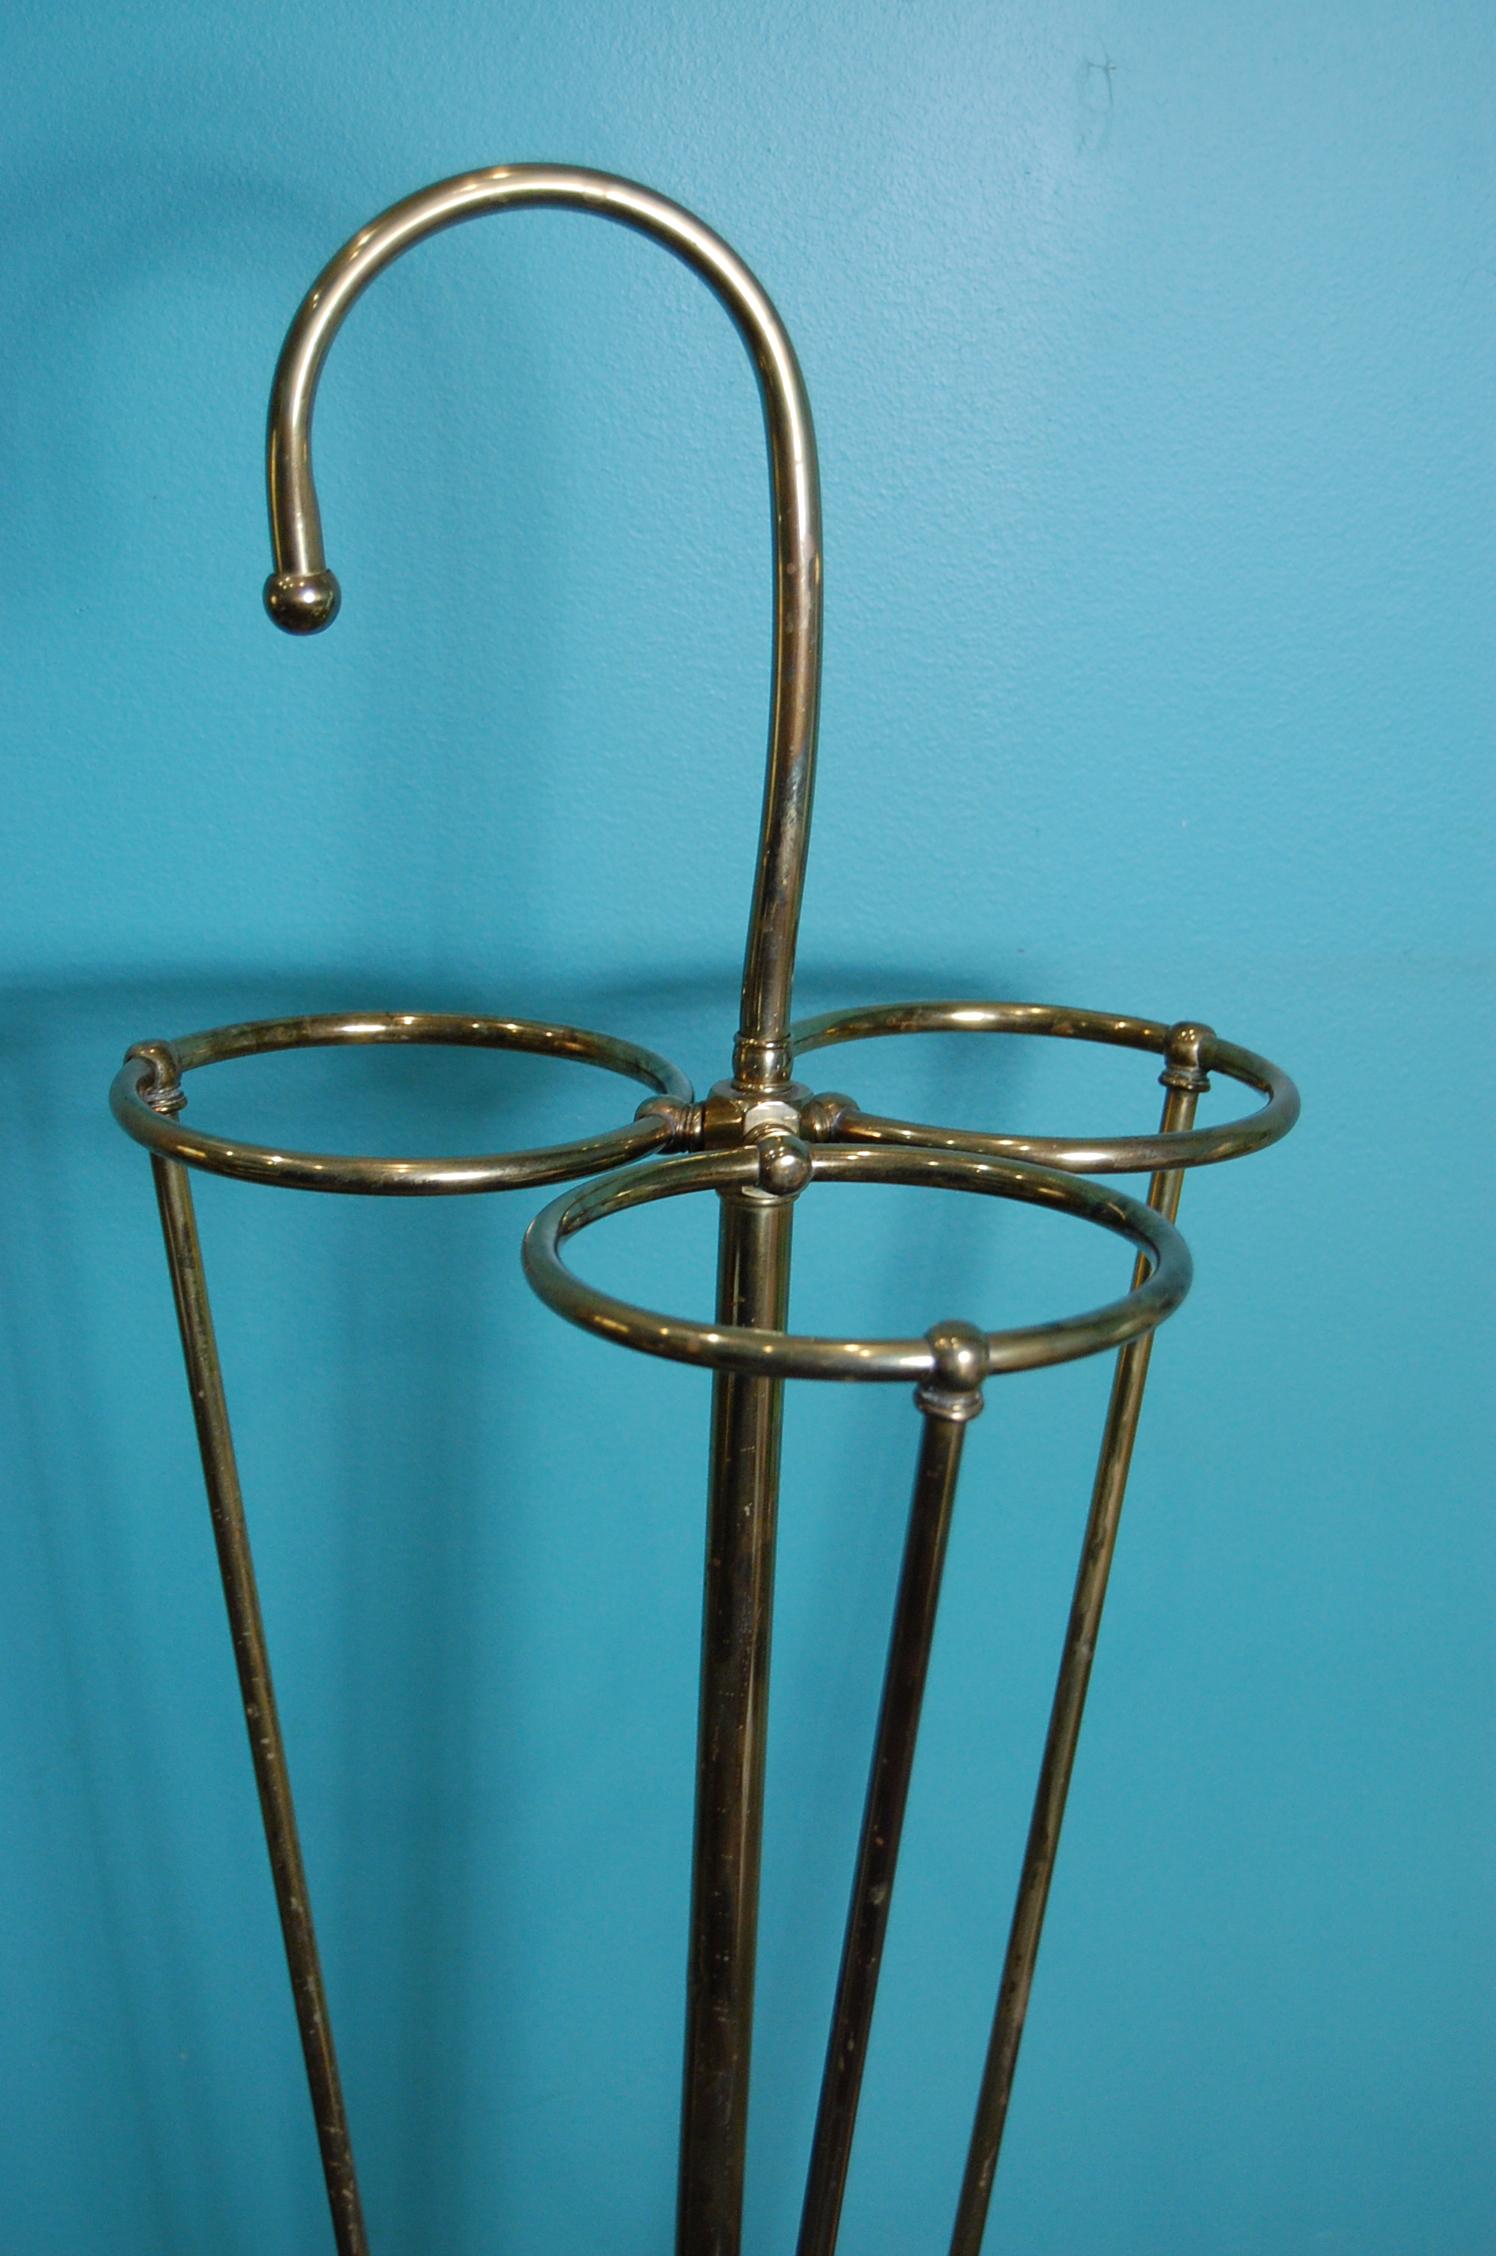 Mid-Century Modern Mid-20th Century Brass Umbrella Stand by Herco Art Manufacturing Company For Sale